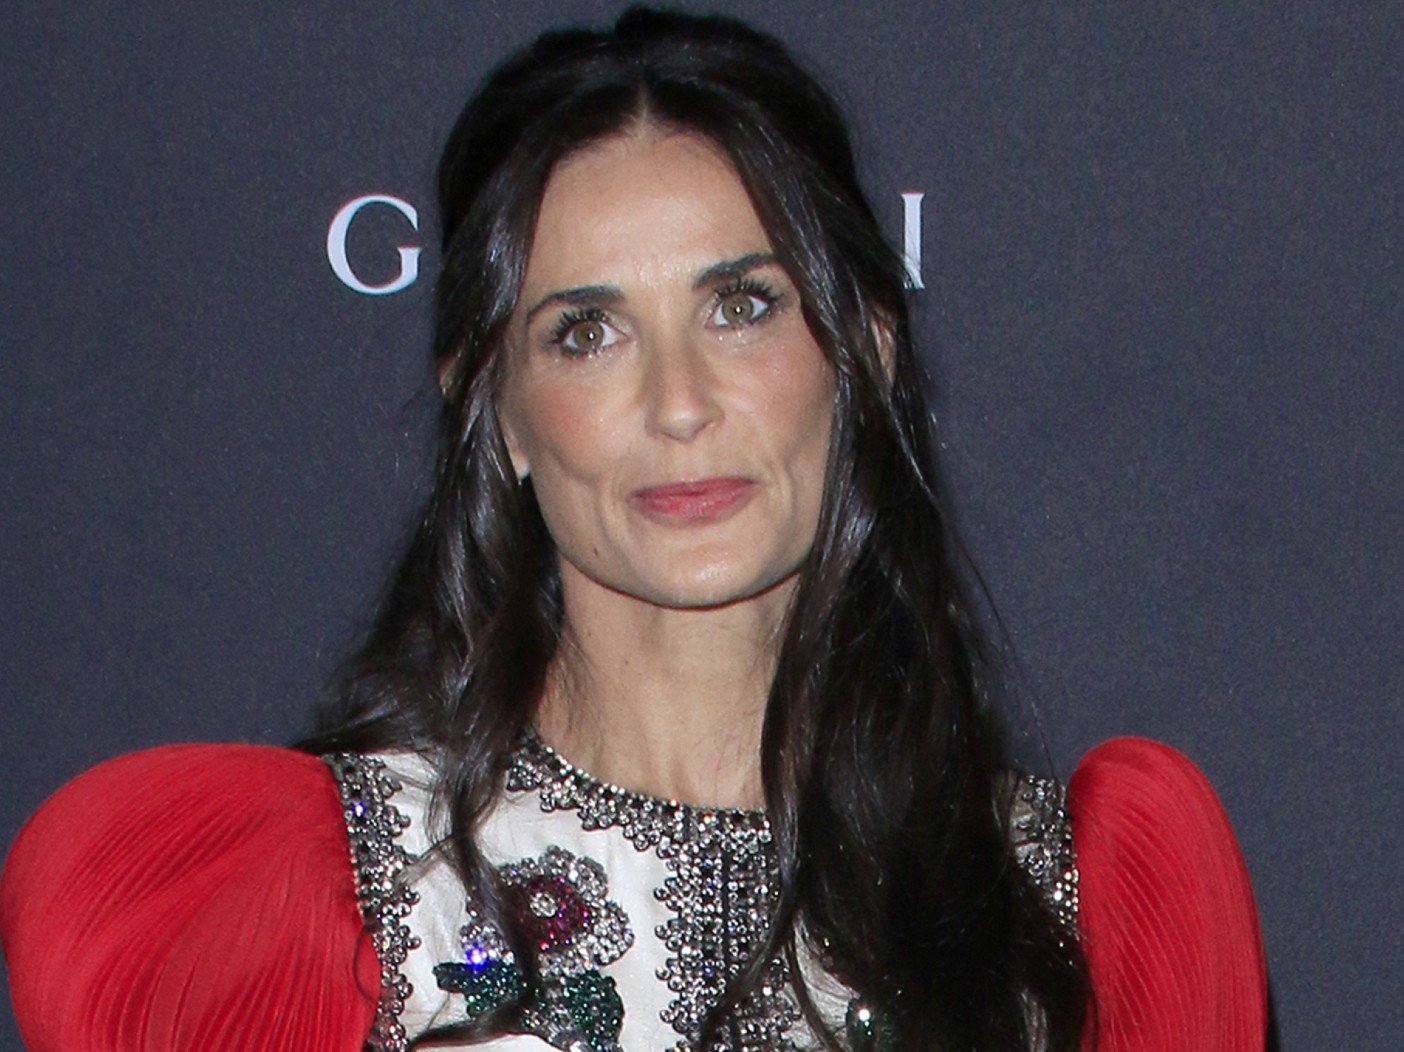 Demi Moore fights against the ‘Patriarchal” Idea about Older Women and Long Hair